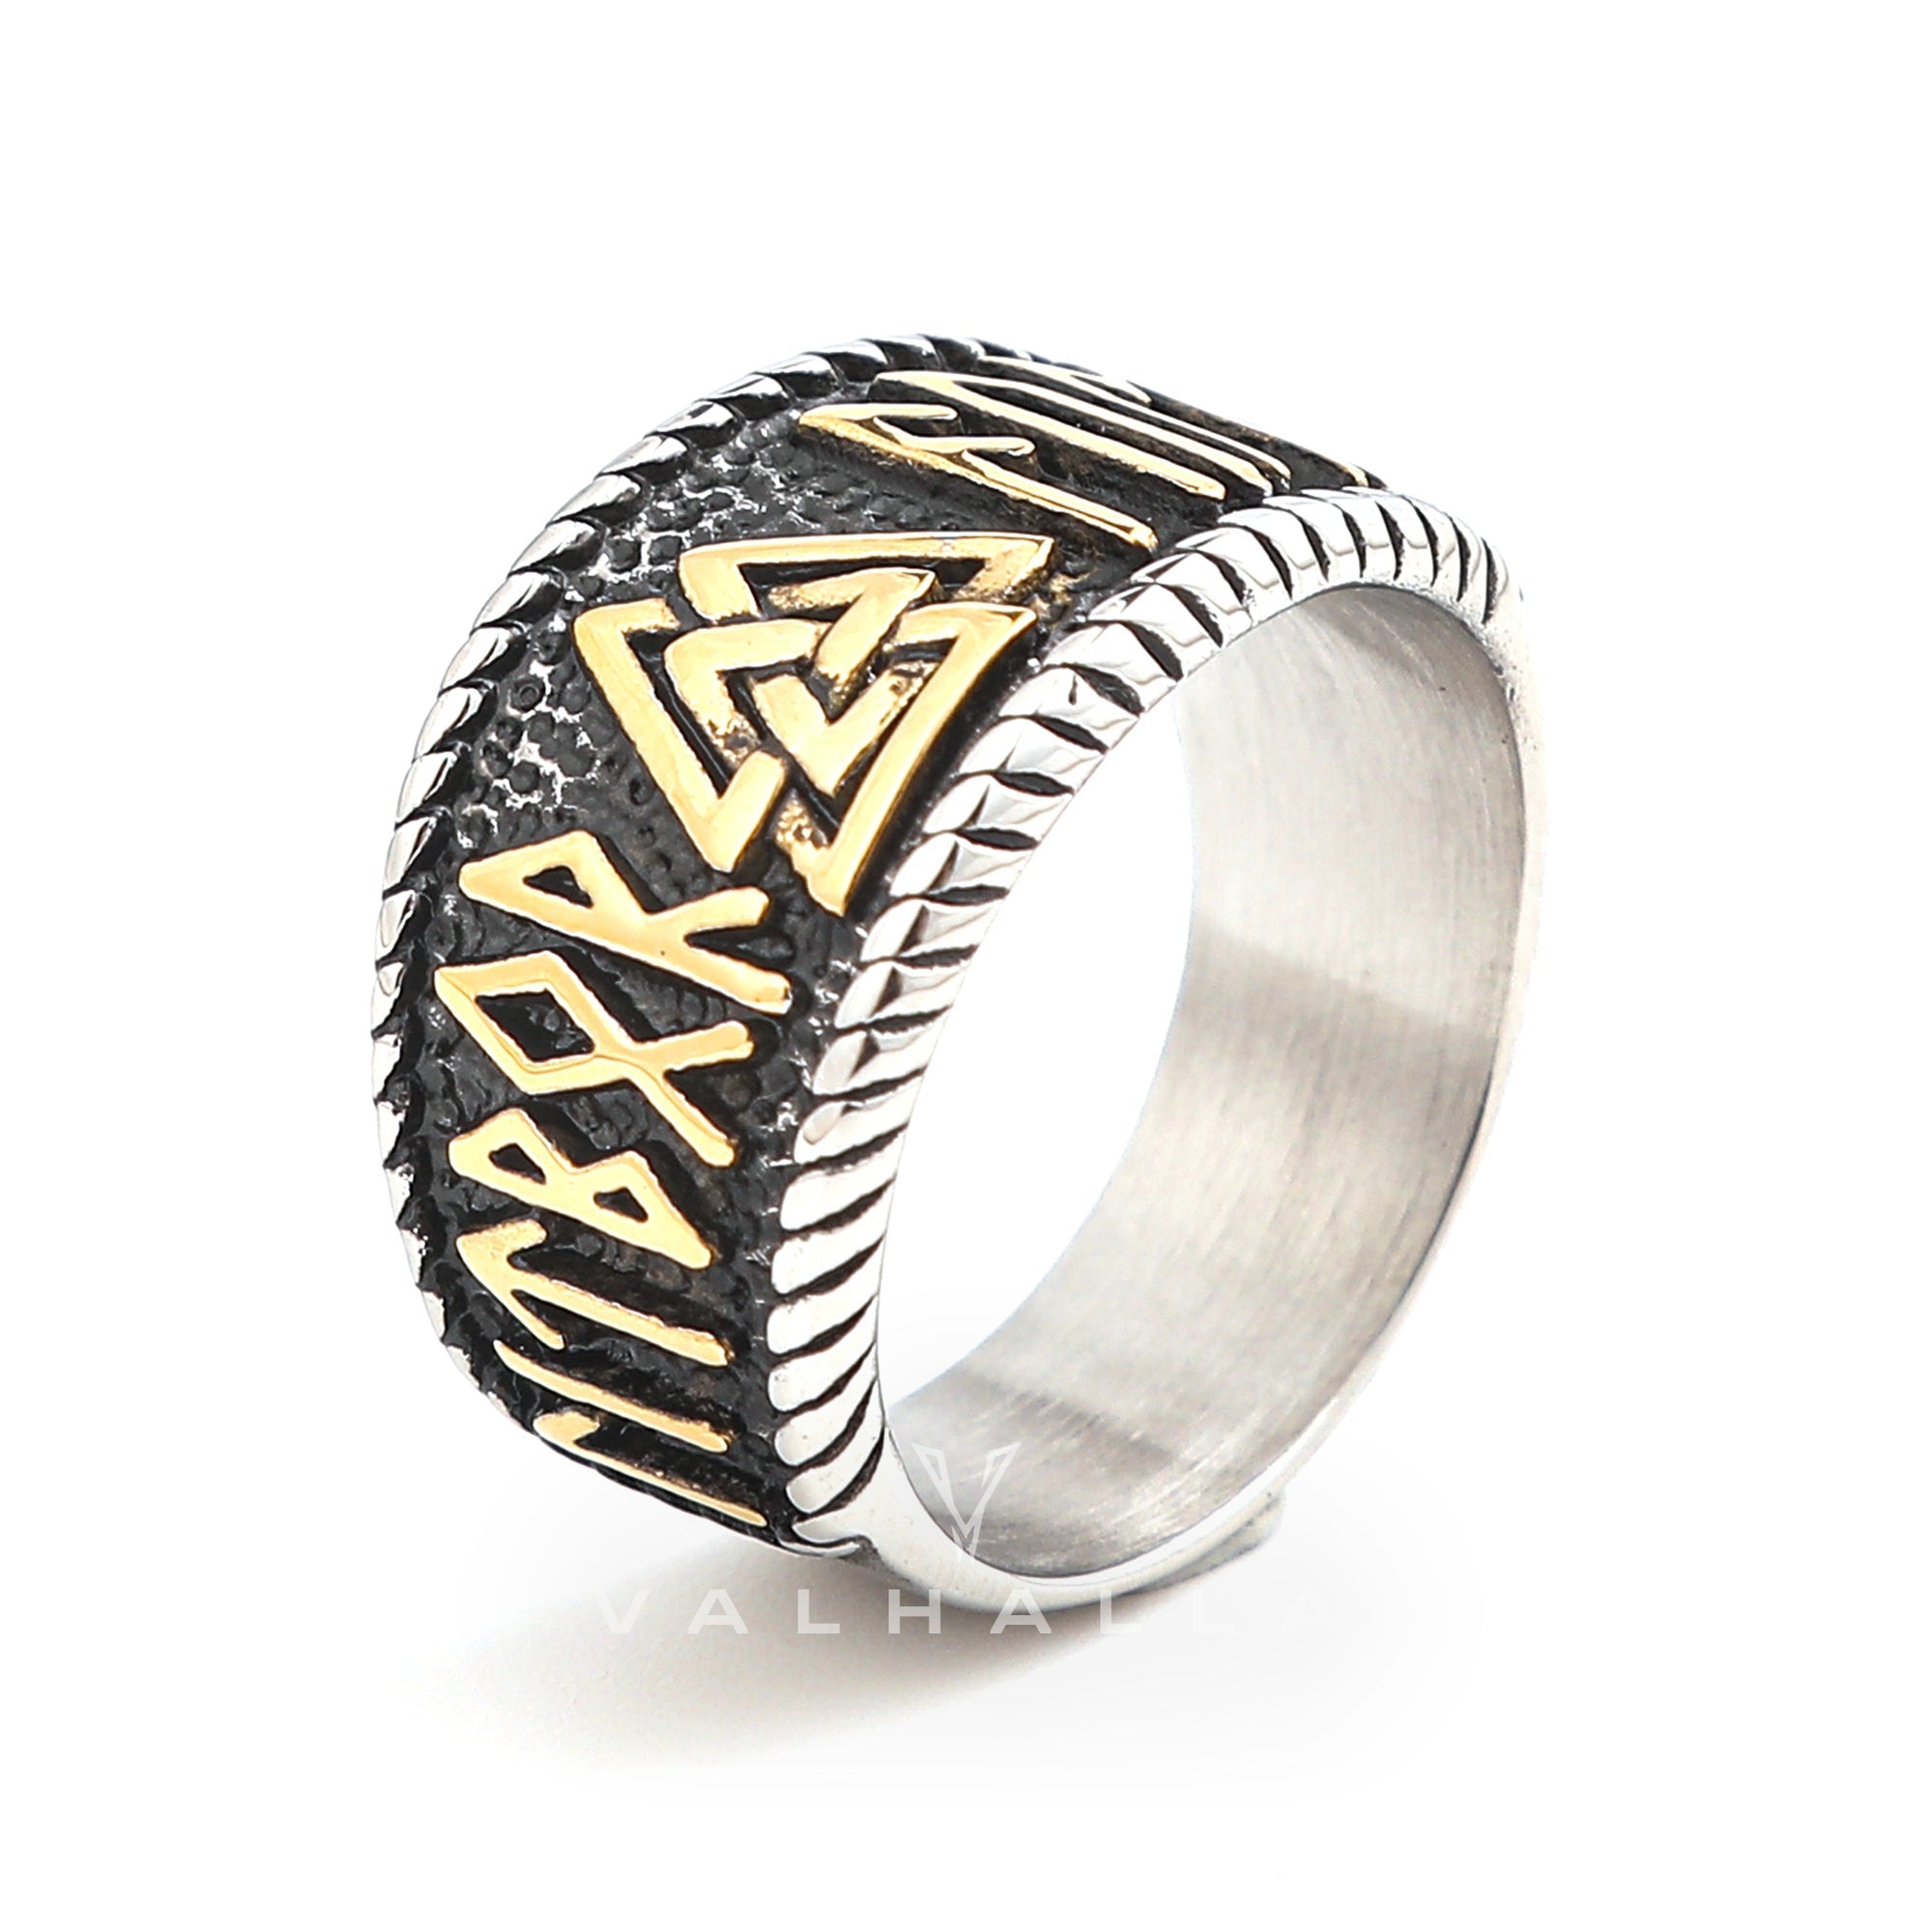 Handcrafted Stainless Steel Dual Color Valknut and Rune Ring